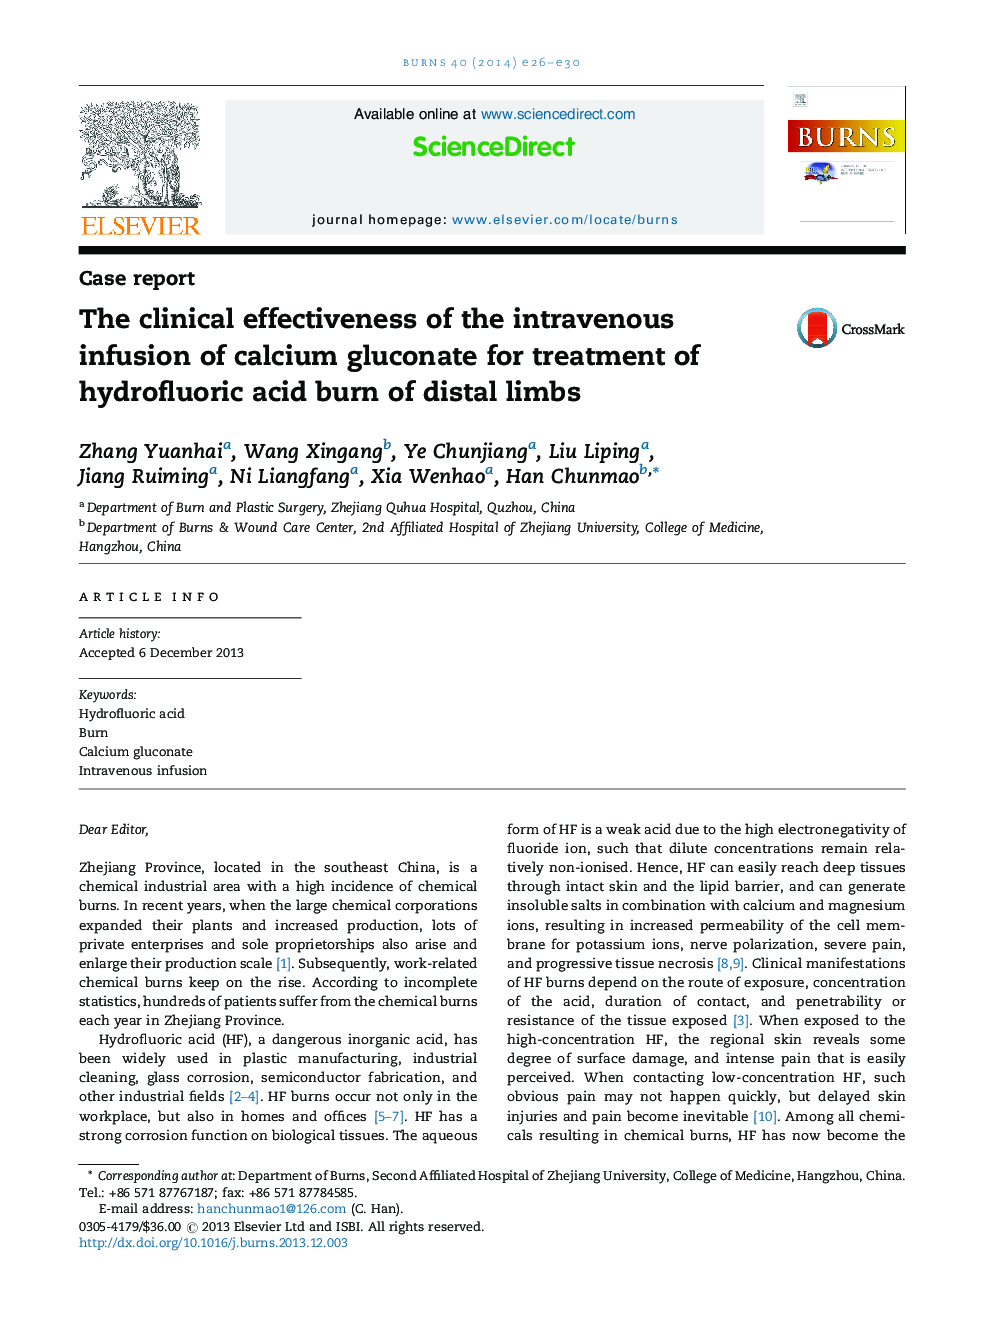 The clinical effectiveness of the intravenous infusion of calcium gluconate for treatment of hydrofluoric acid burn of distal limbs